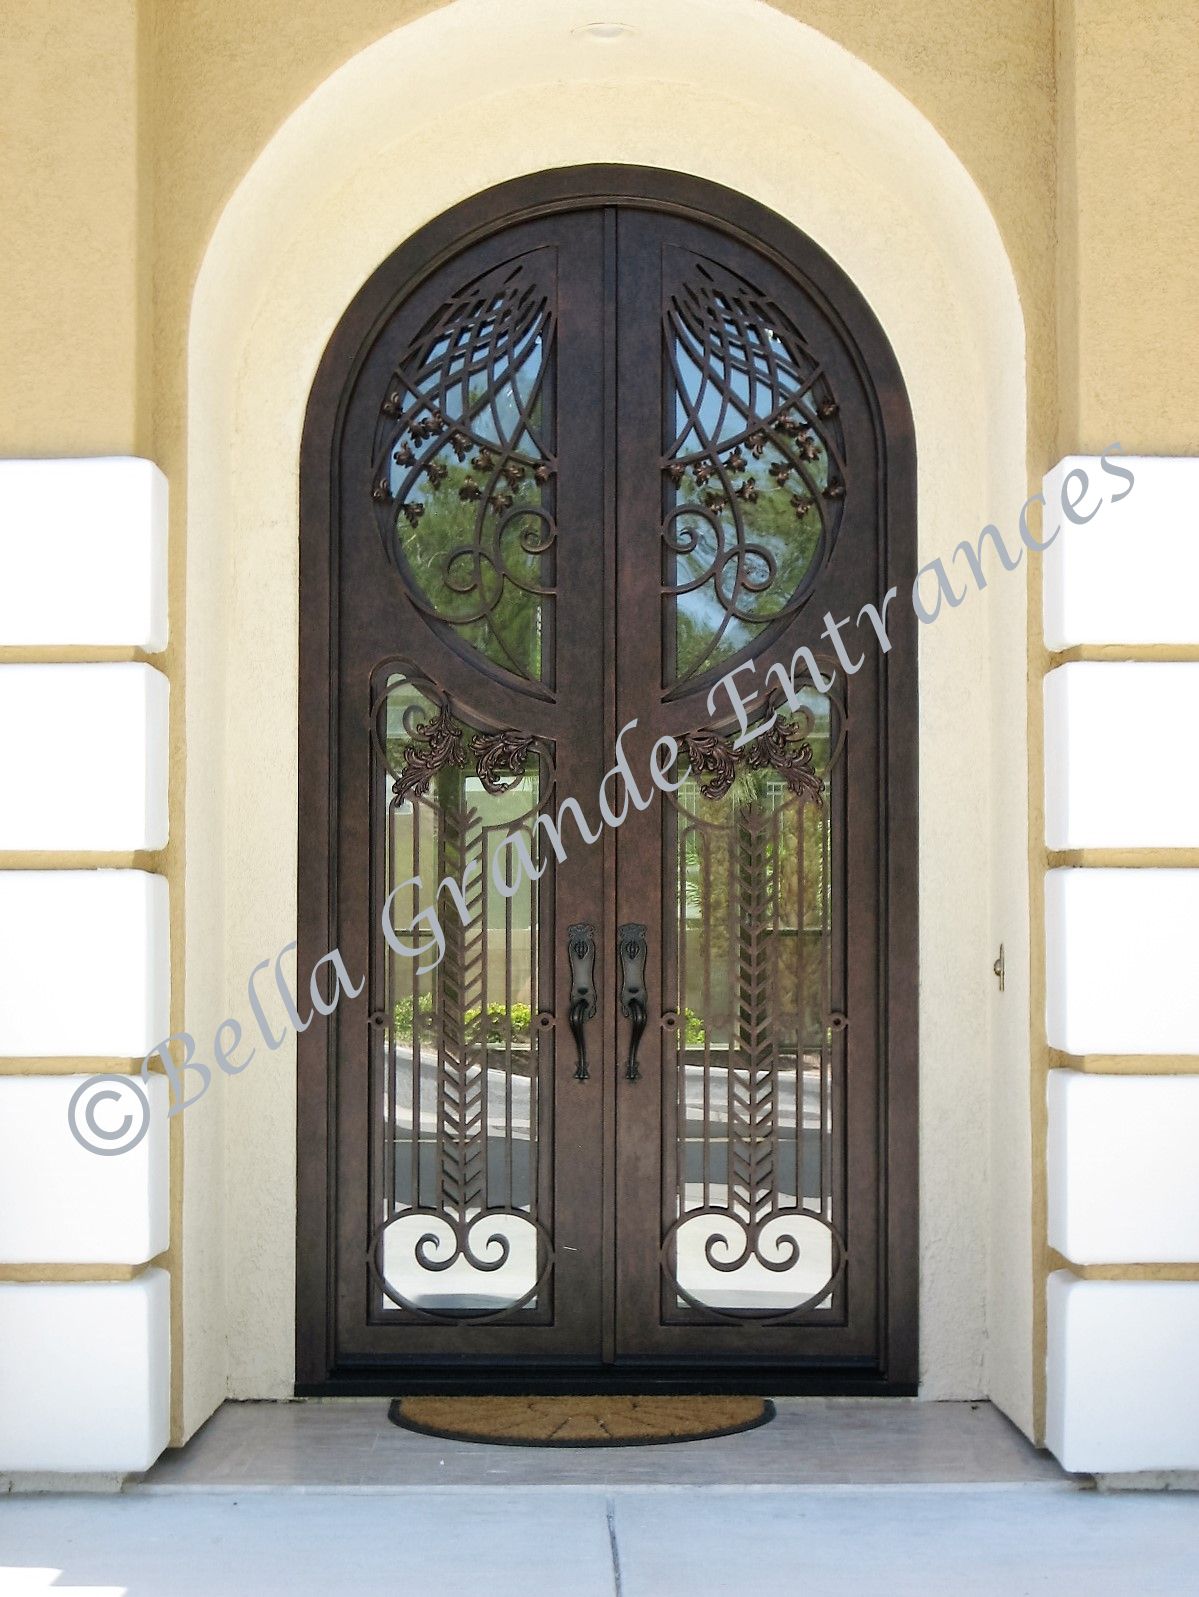 This beautifully crafted Decorative Double Iron Door, manufactured by Bella Grande Entrances Las Vegas, is elegantly showcased at the entrance of a house.